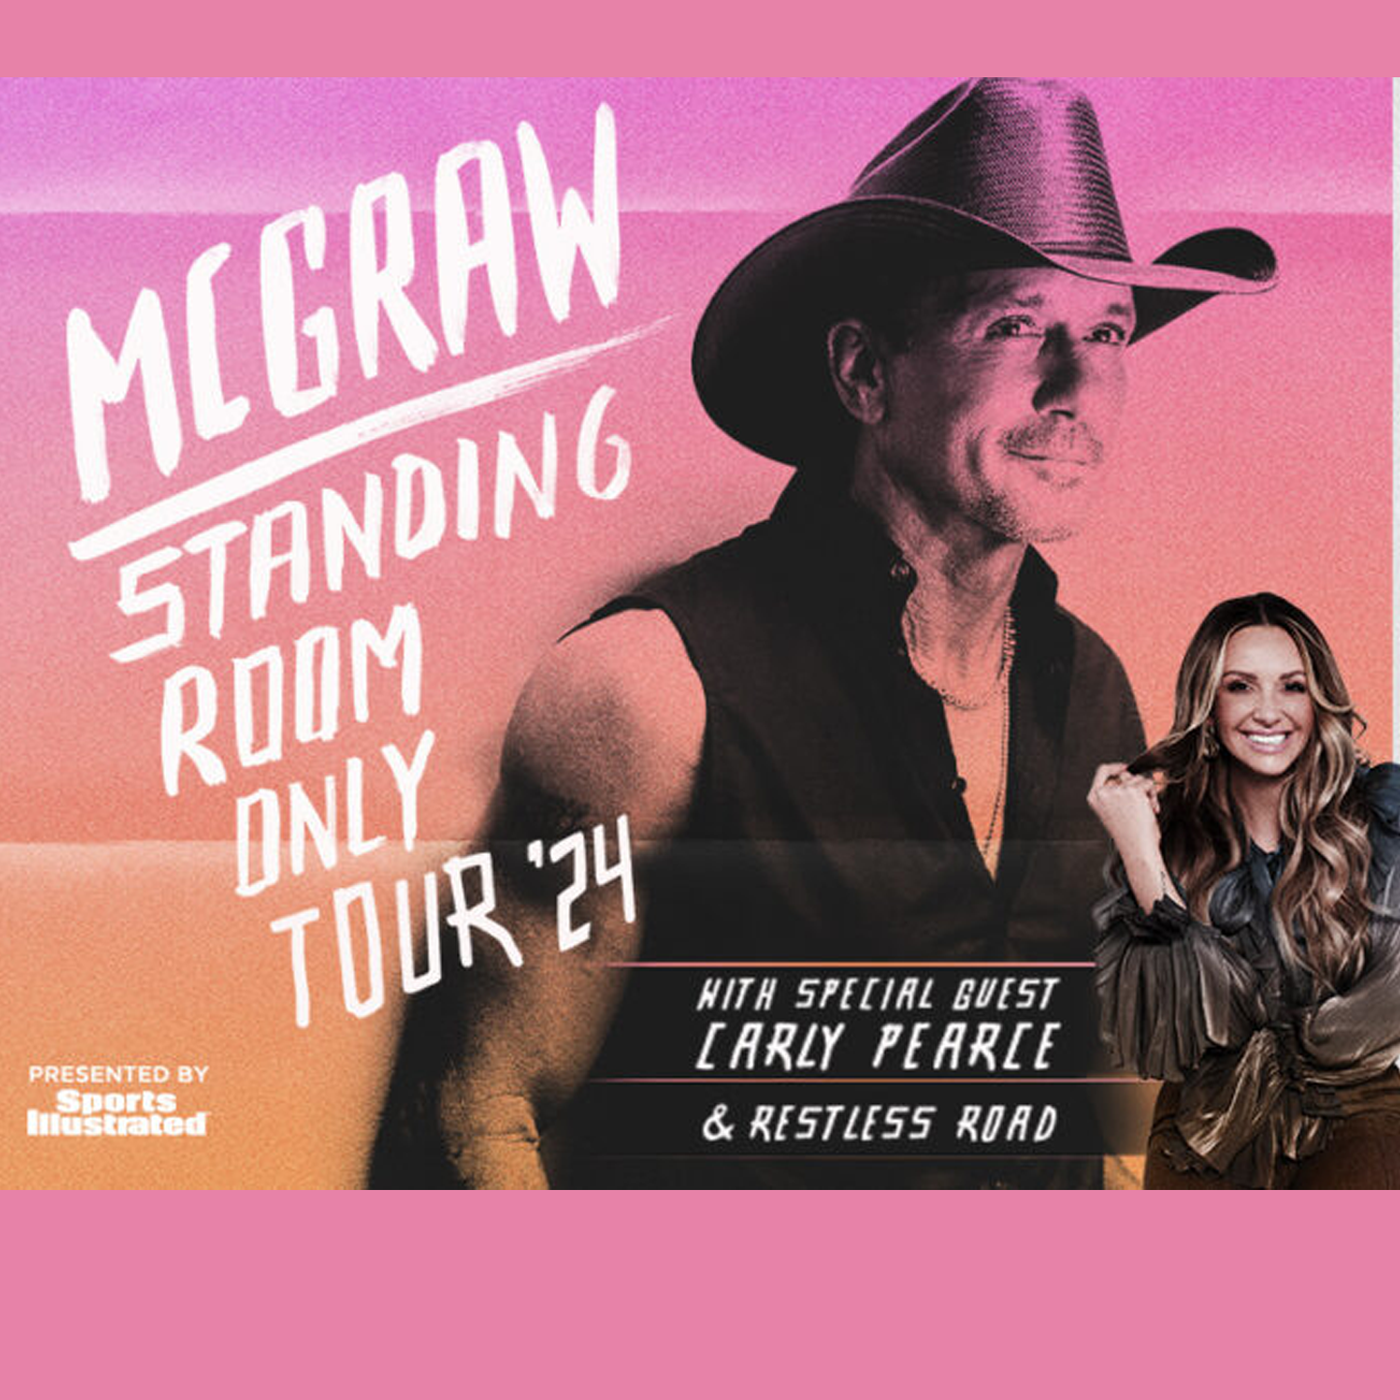 Tim Mcgraw called in to Tracy & Fizz to talk about his upcoming Standing Room Only Tour coming to Denver